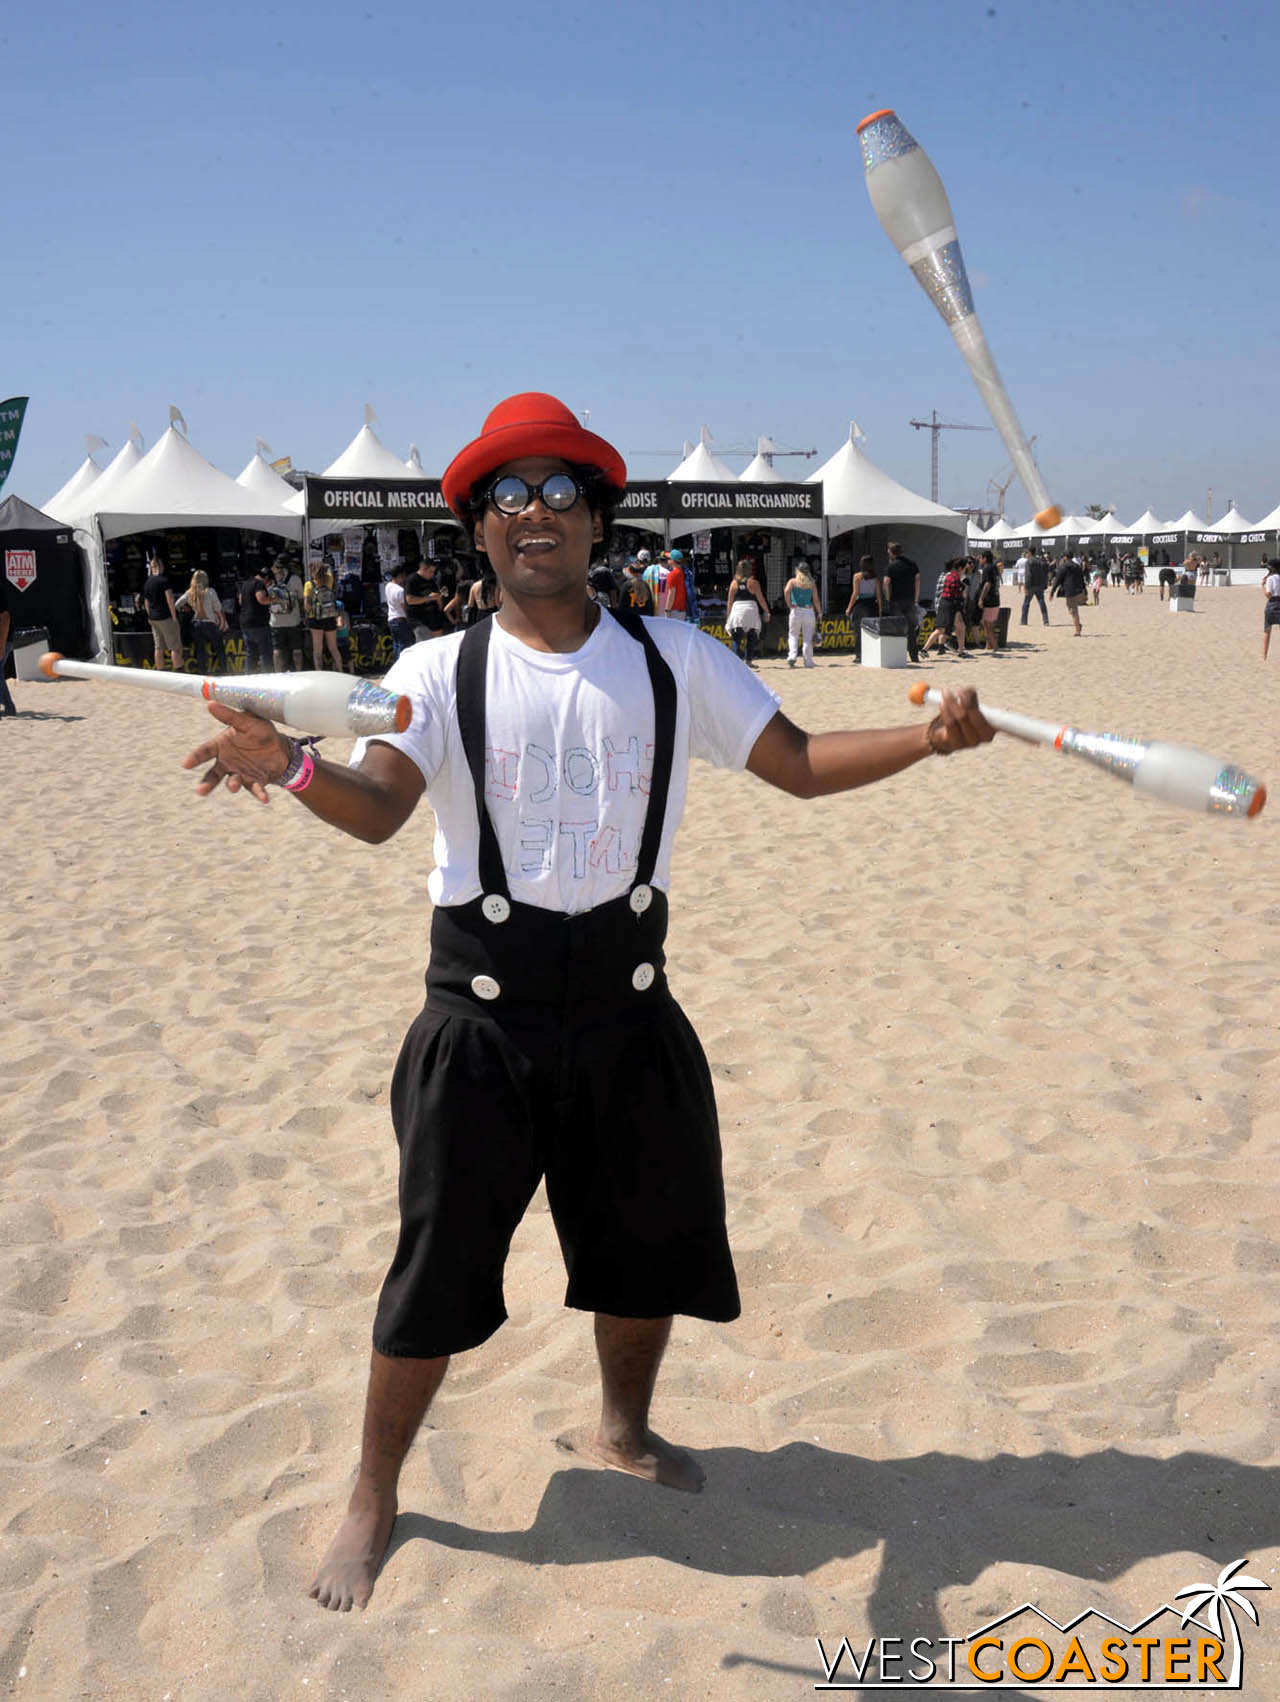  A juggler on hand on the sand. 